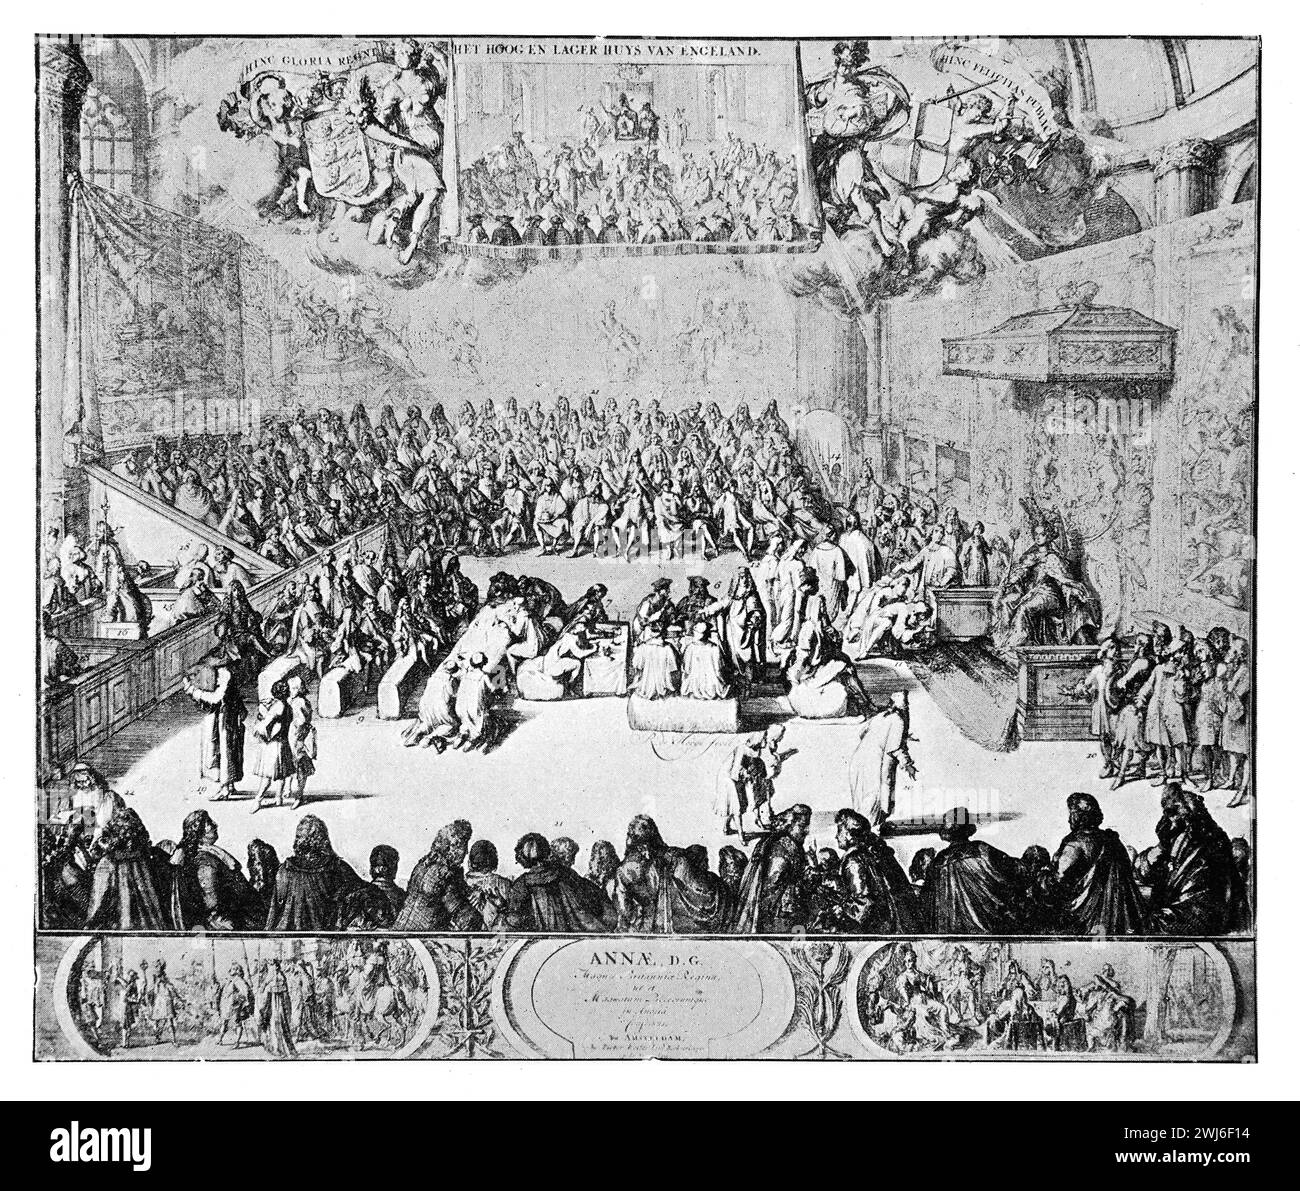 Queen Anne presiding in State over the House of Lords, earlly 18th century. Black and White Illustration from the Connoisseur, an Illustrated Magazine for Collectors Voll 3 (May-Aug 1902) published in London. Stock Photo